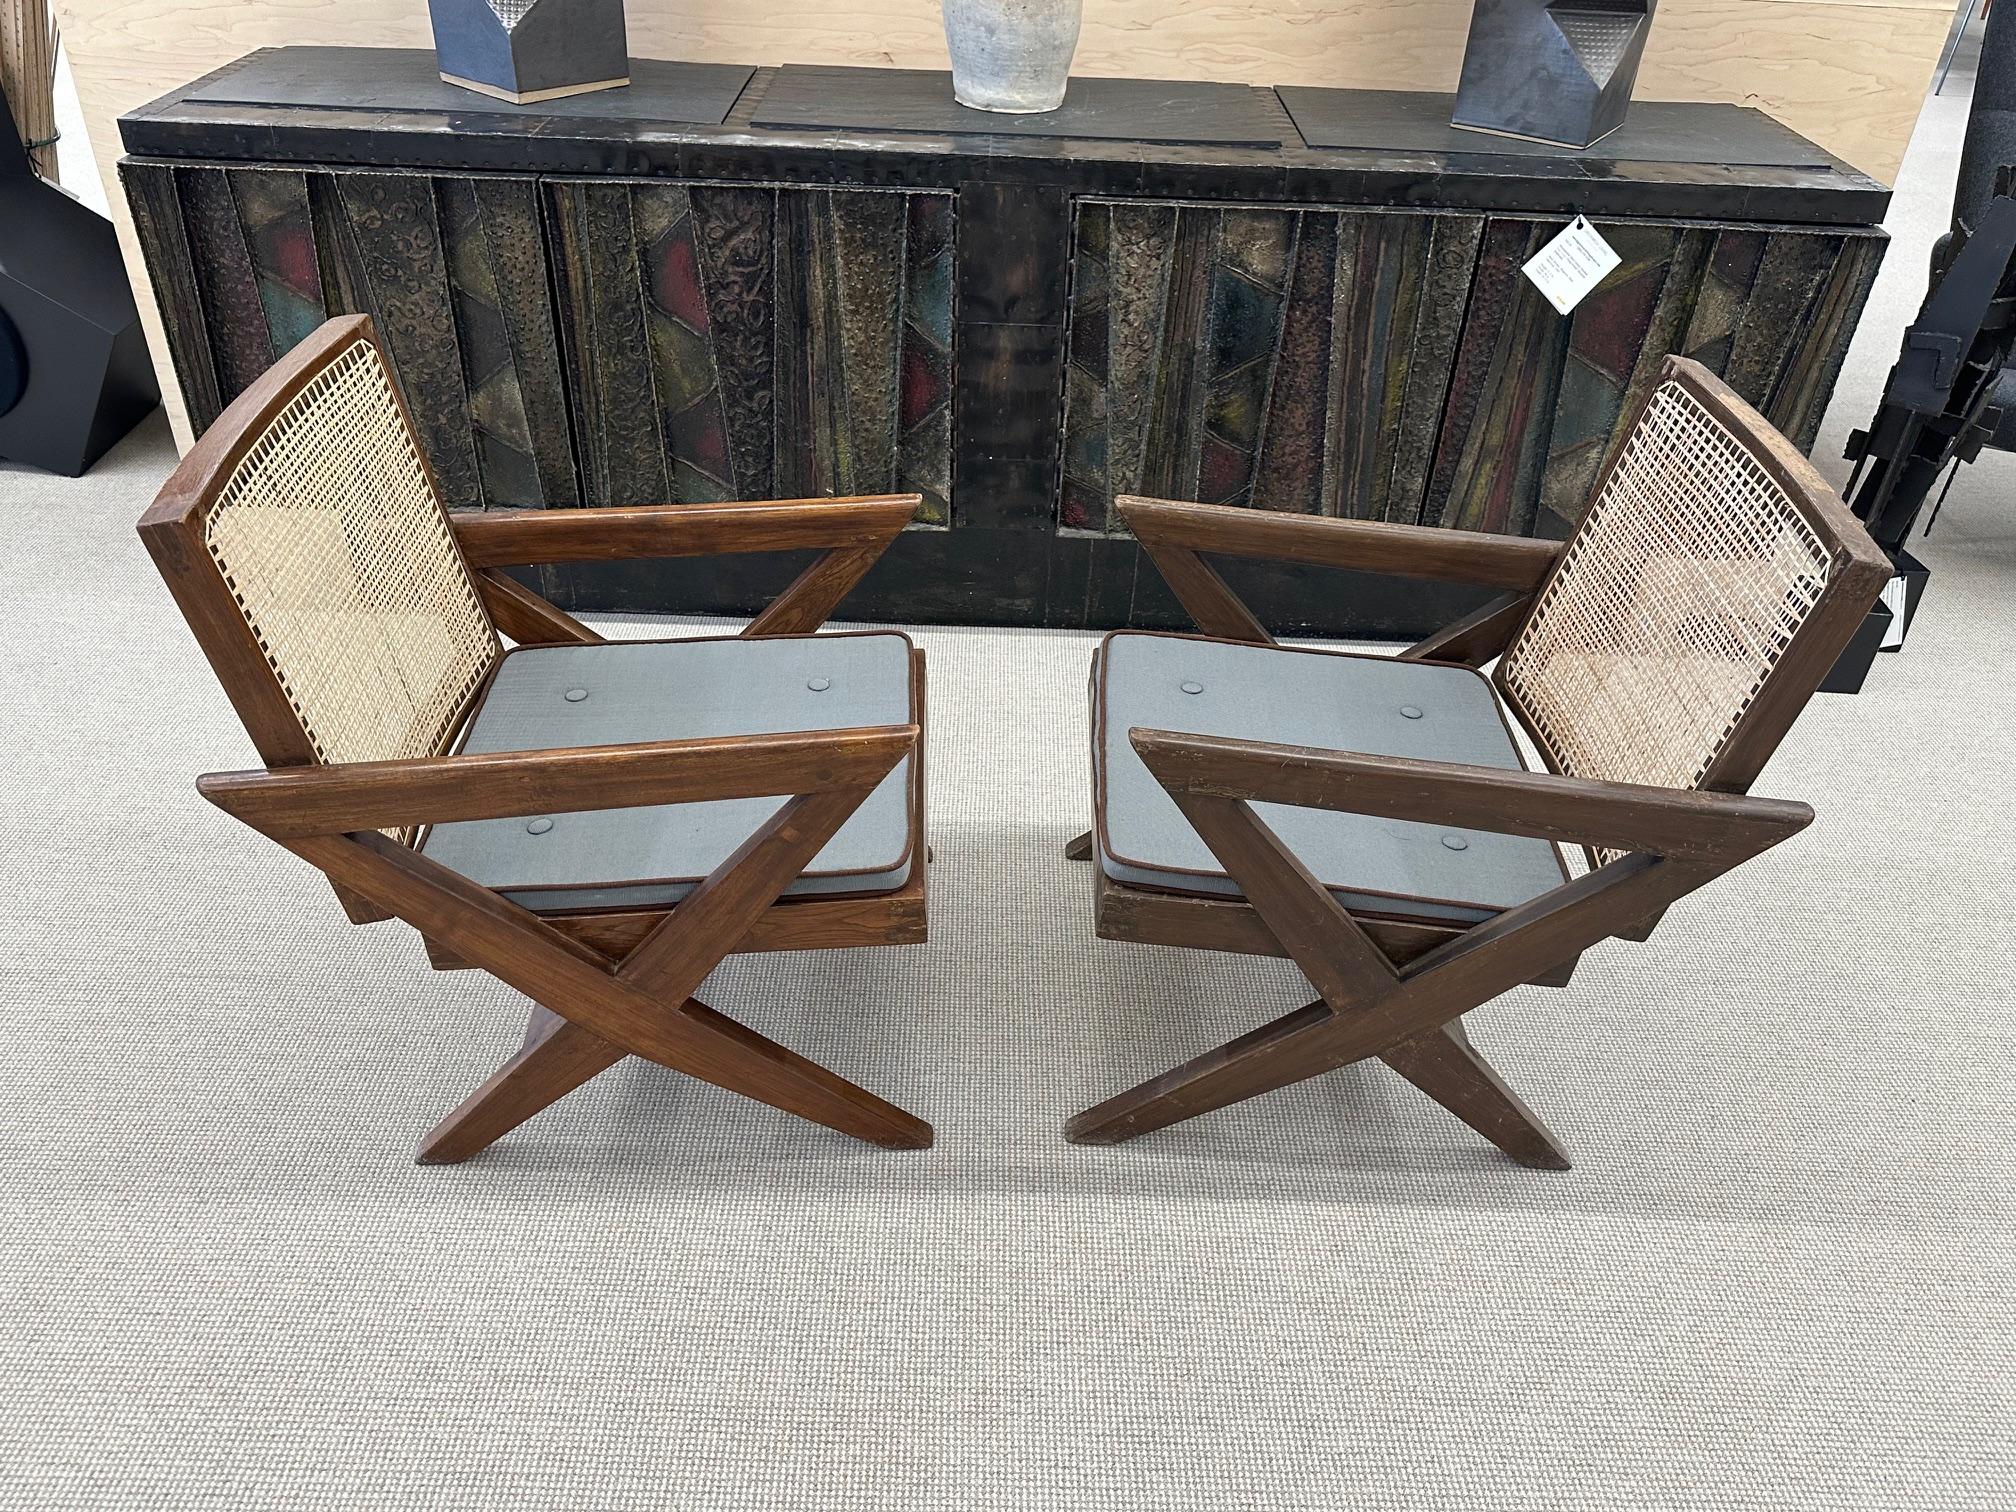 Pierre Jeanneret, French Mid-Century Modern, Lounge Chairs, Chandigarh, 1950s For Sale 1